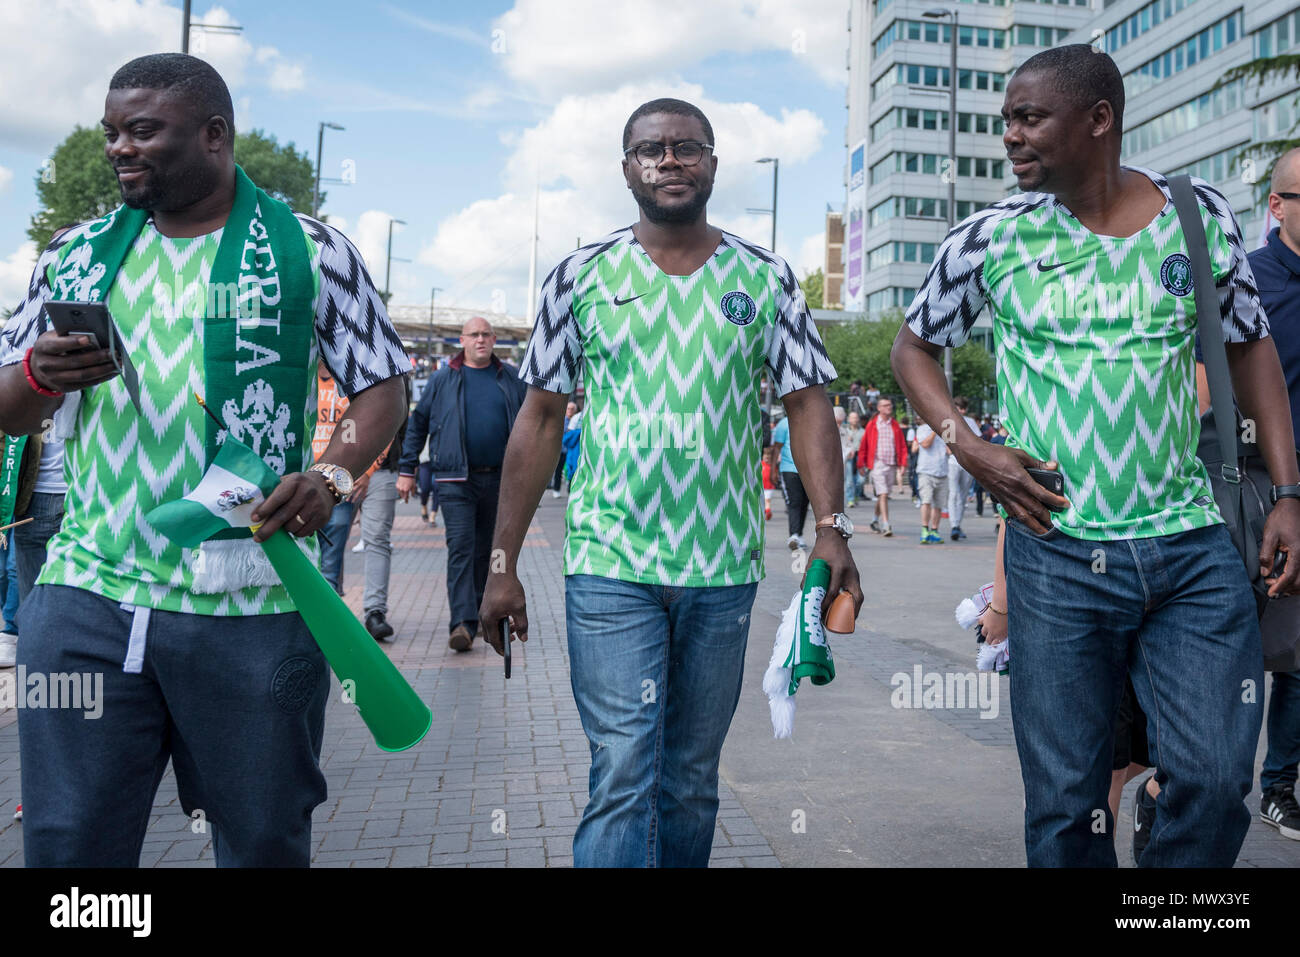 London, UK.  2 June 2018.  Nigerian fans wear the country's latest replica shirt, which bears a feathered pattern referencing the Nigerian team which made its debut in the 1994 World Cup.  3 million replica shirts have sold on pre-order alone with others selling out in minutes online. Fans arrive for the friendly football match between England and Nigeria at Wembley Stadium, the final match at Wembley before England travel to the World Cup in Russia  Credit: Stephen Chung / Alamy Live News Stock Photo